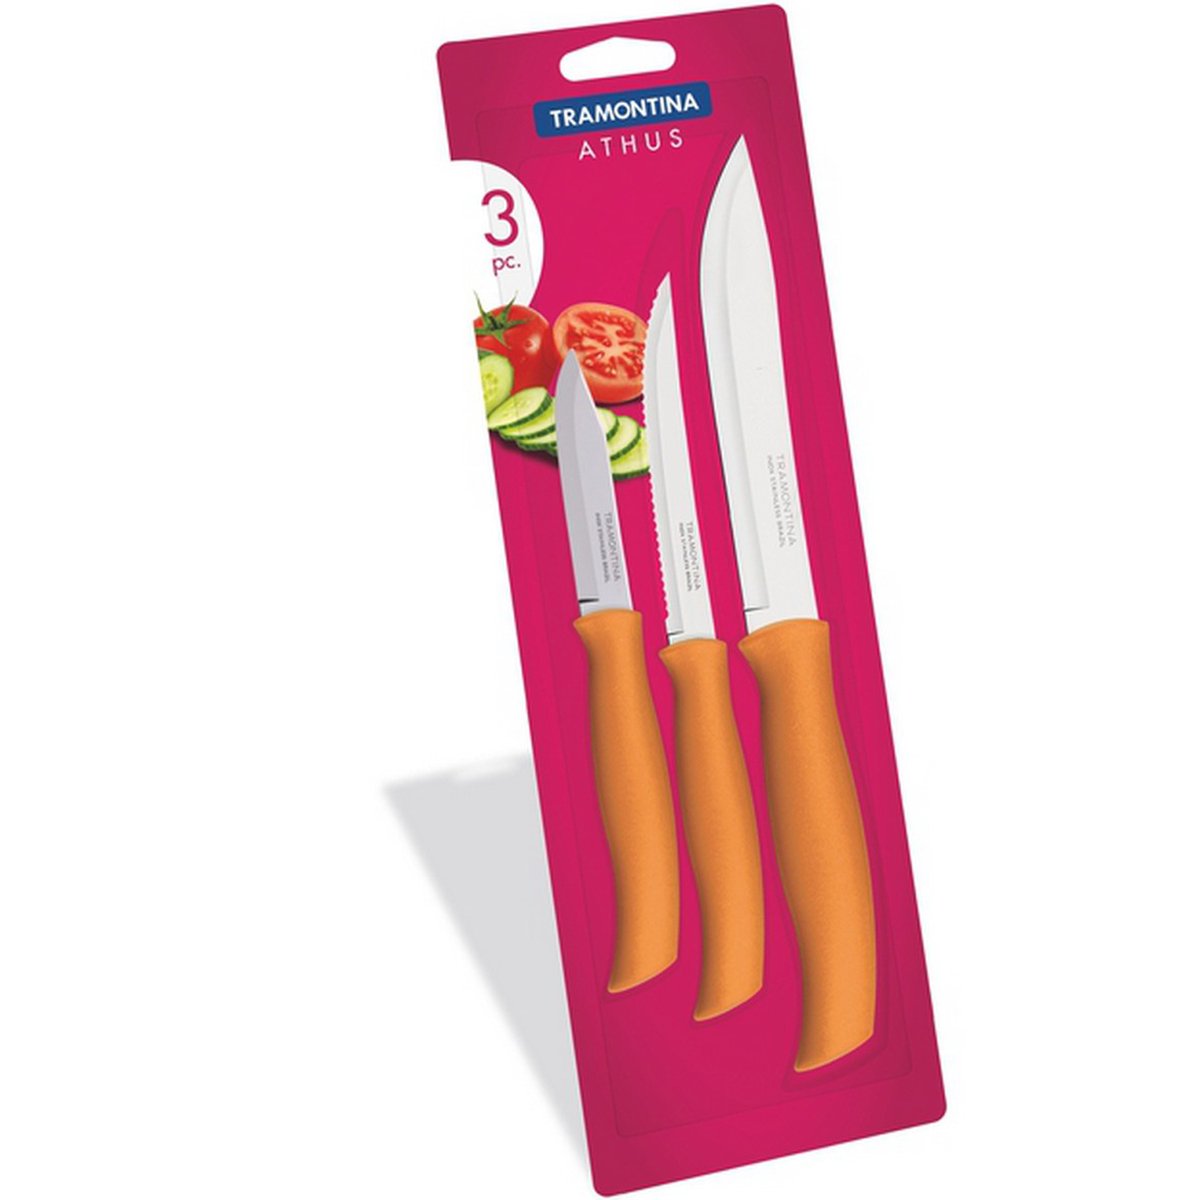 Tramontina Athus Knife 23099 6inch Assorted 3Pcs